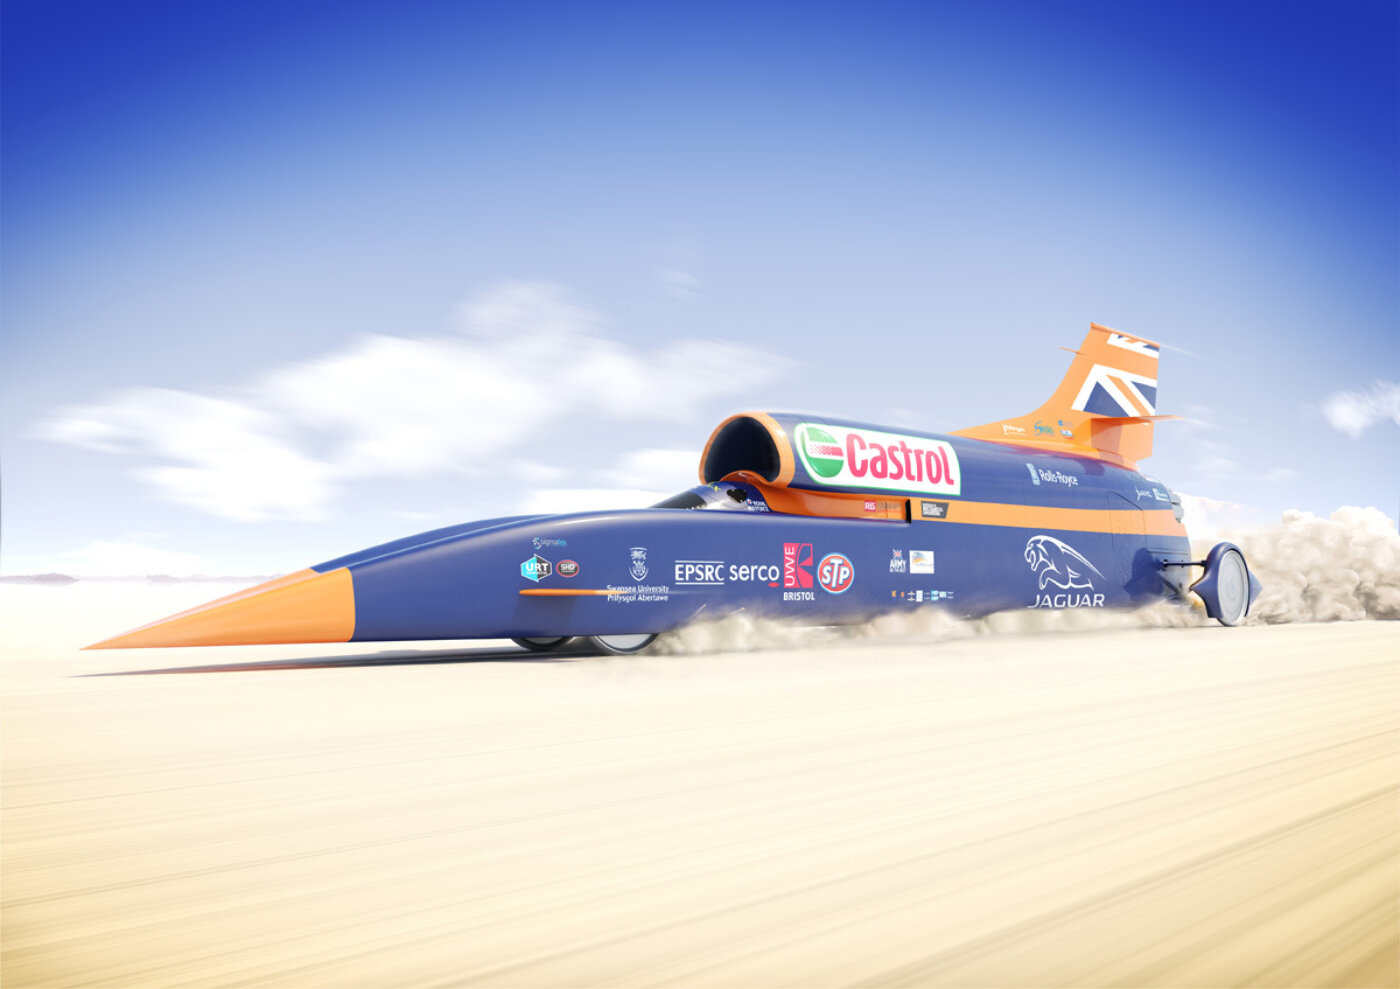 						Bloodhound Supersonic Project Car 1
			